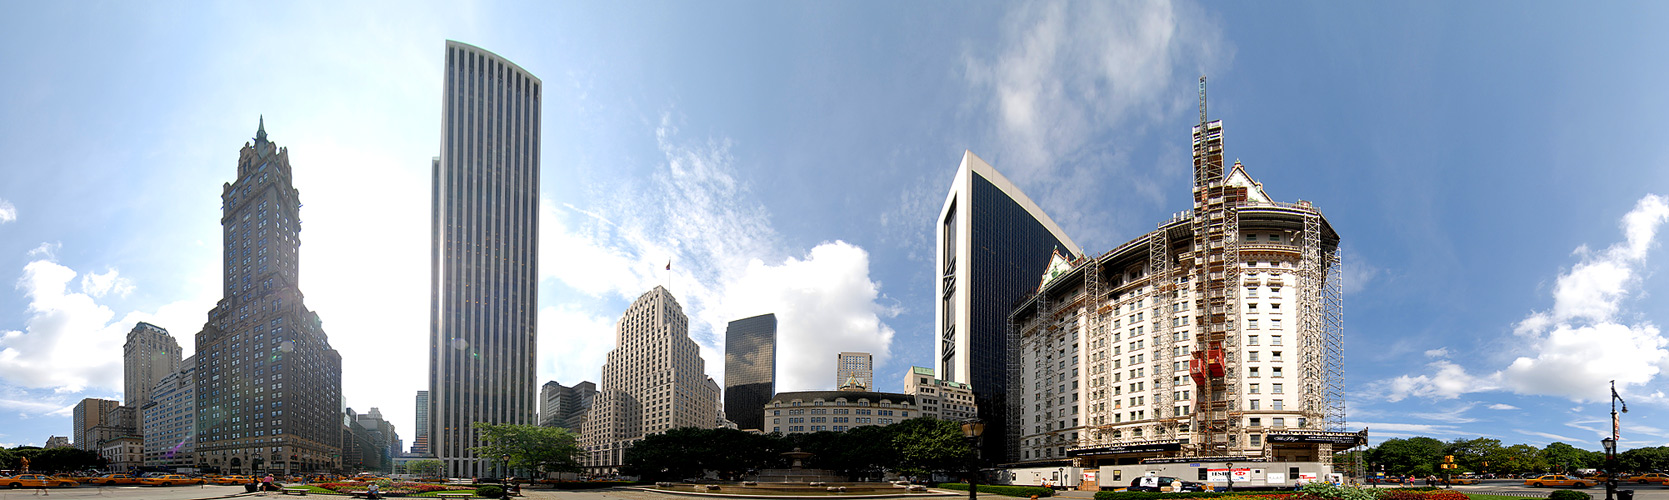 The Plaza (Reloaded for fc-Pano Function)